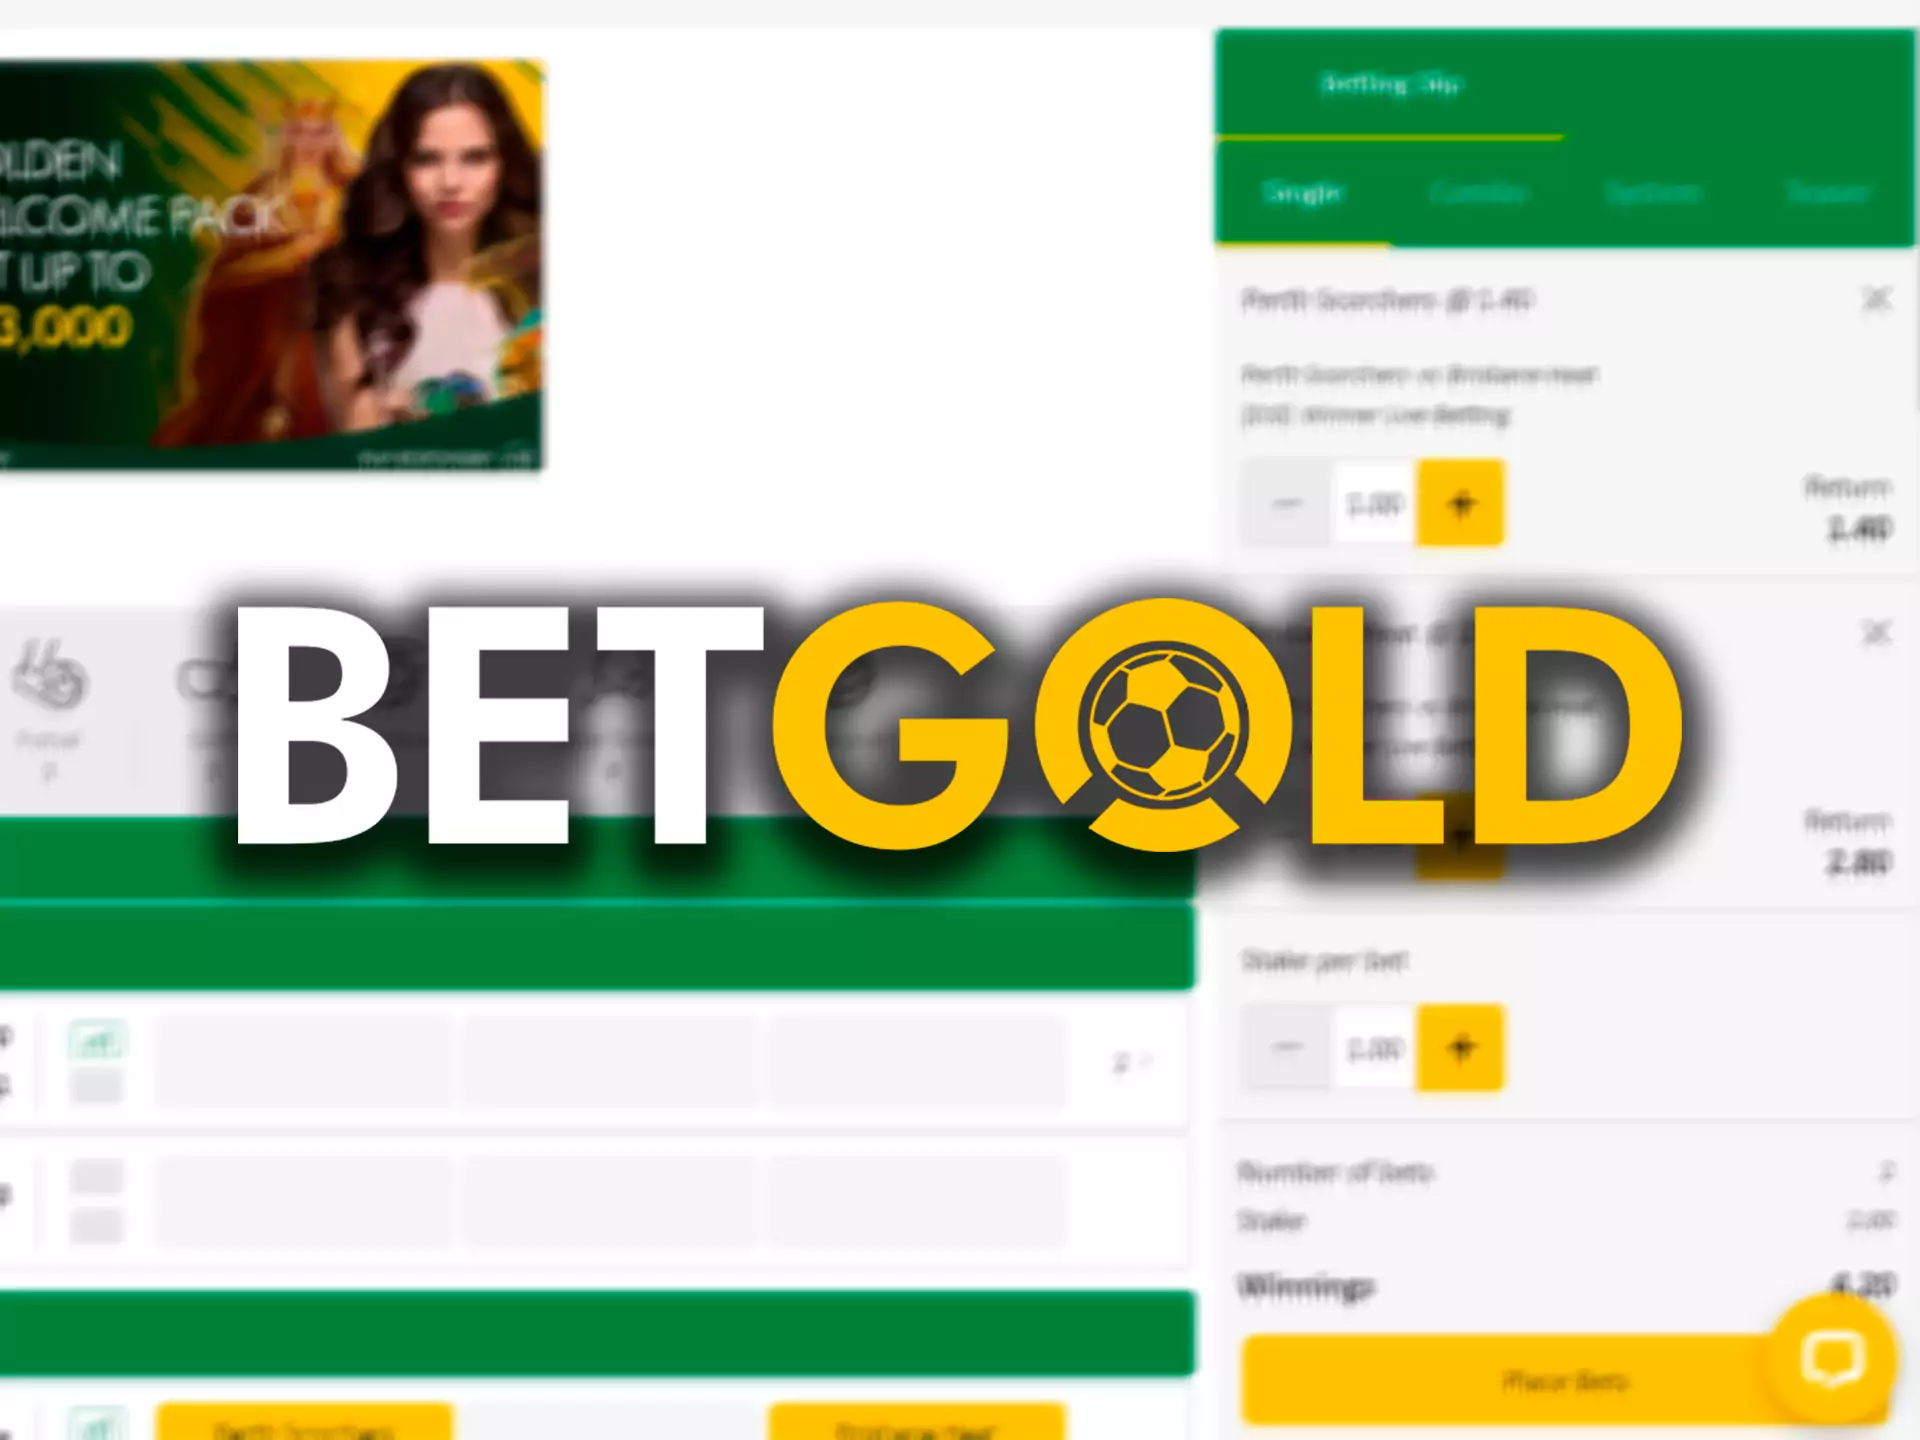 Betgold provides one of the biggest welcome bonuses to bet on IPL events.